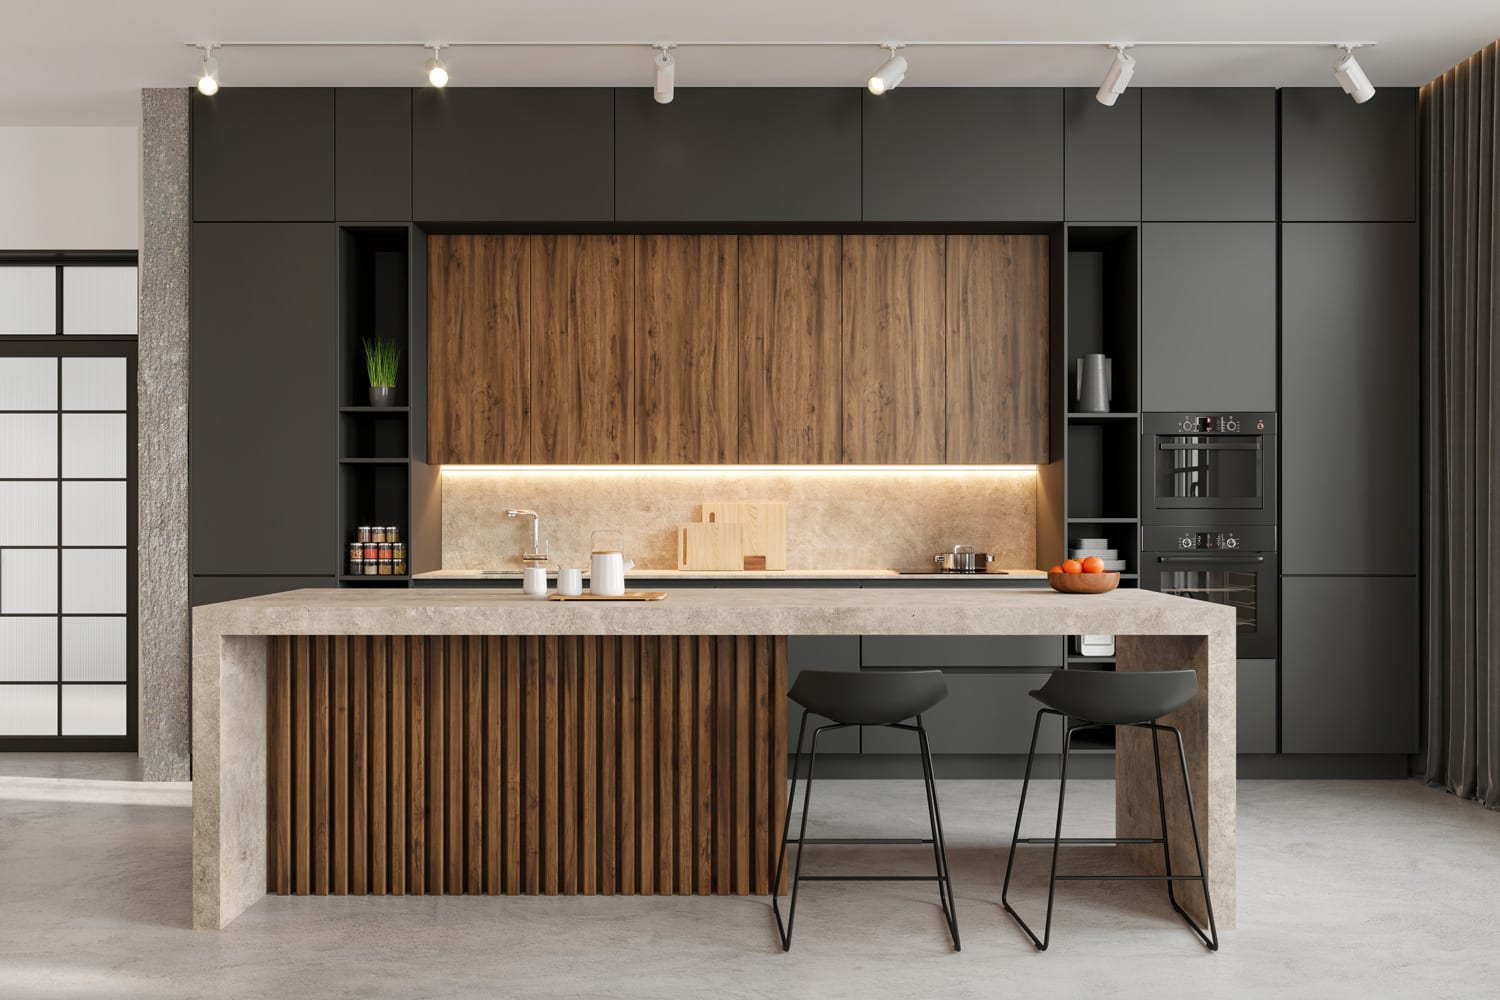 Large modern open space loft kitchen interior with large kitchen island and bar chairs